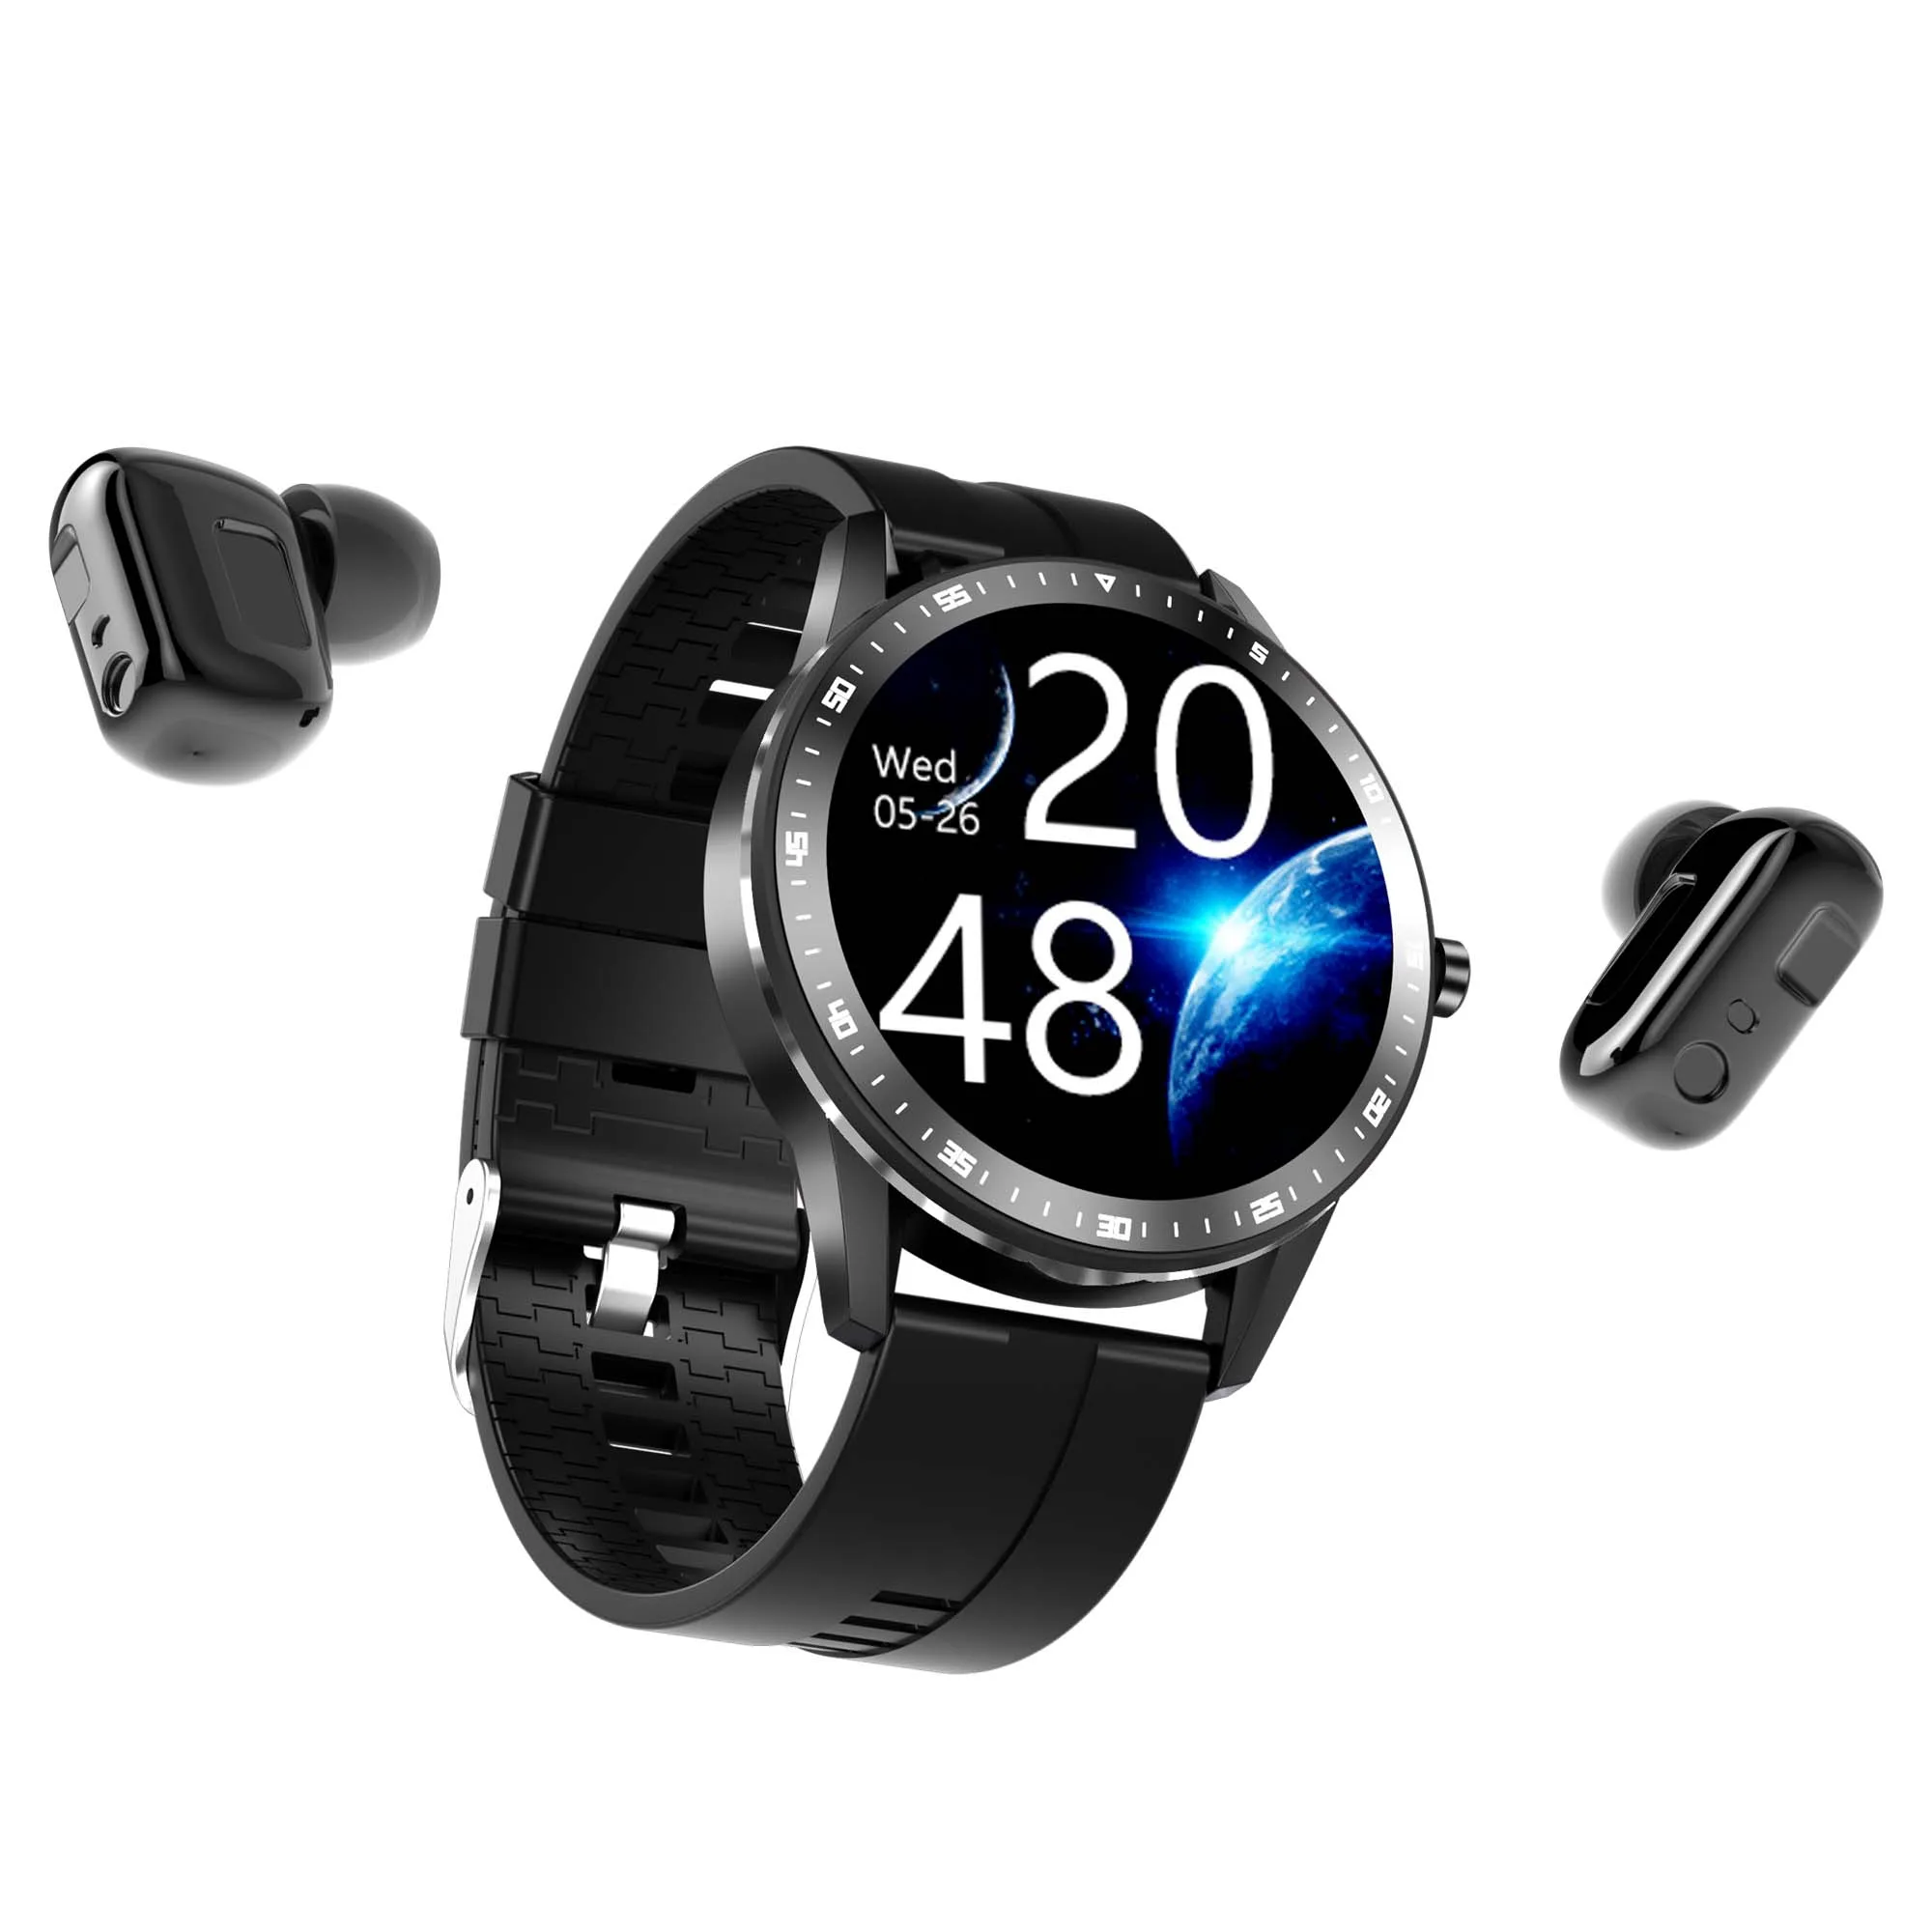 

X6 Smart Watch Blue tooth Earphone 2 in One BT 5.0 Binaural Call Active Noise Cancellation Heart Rate Sports TWS True Wireless